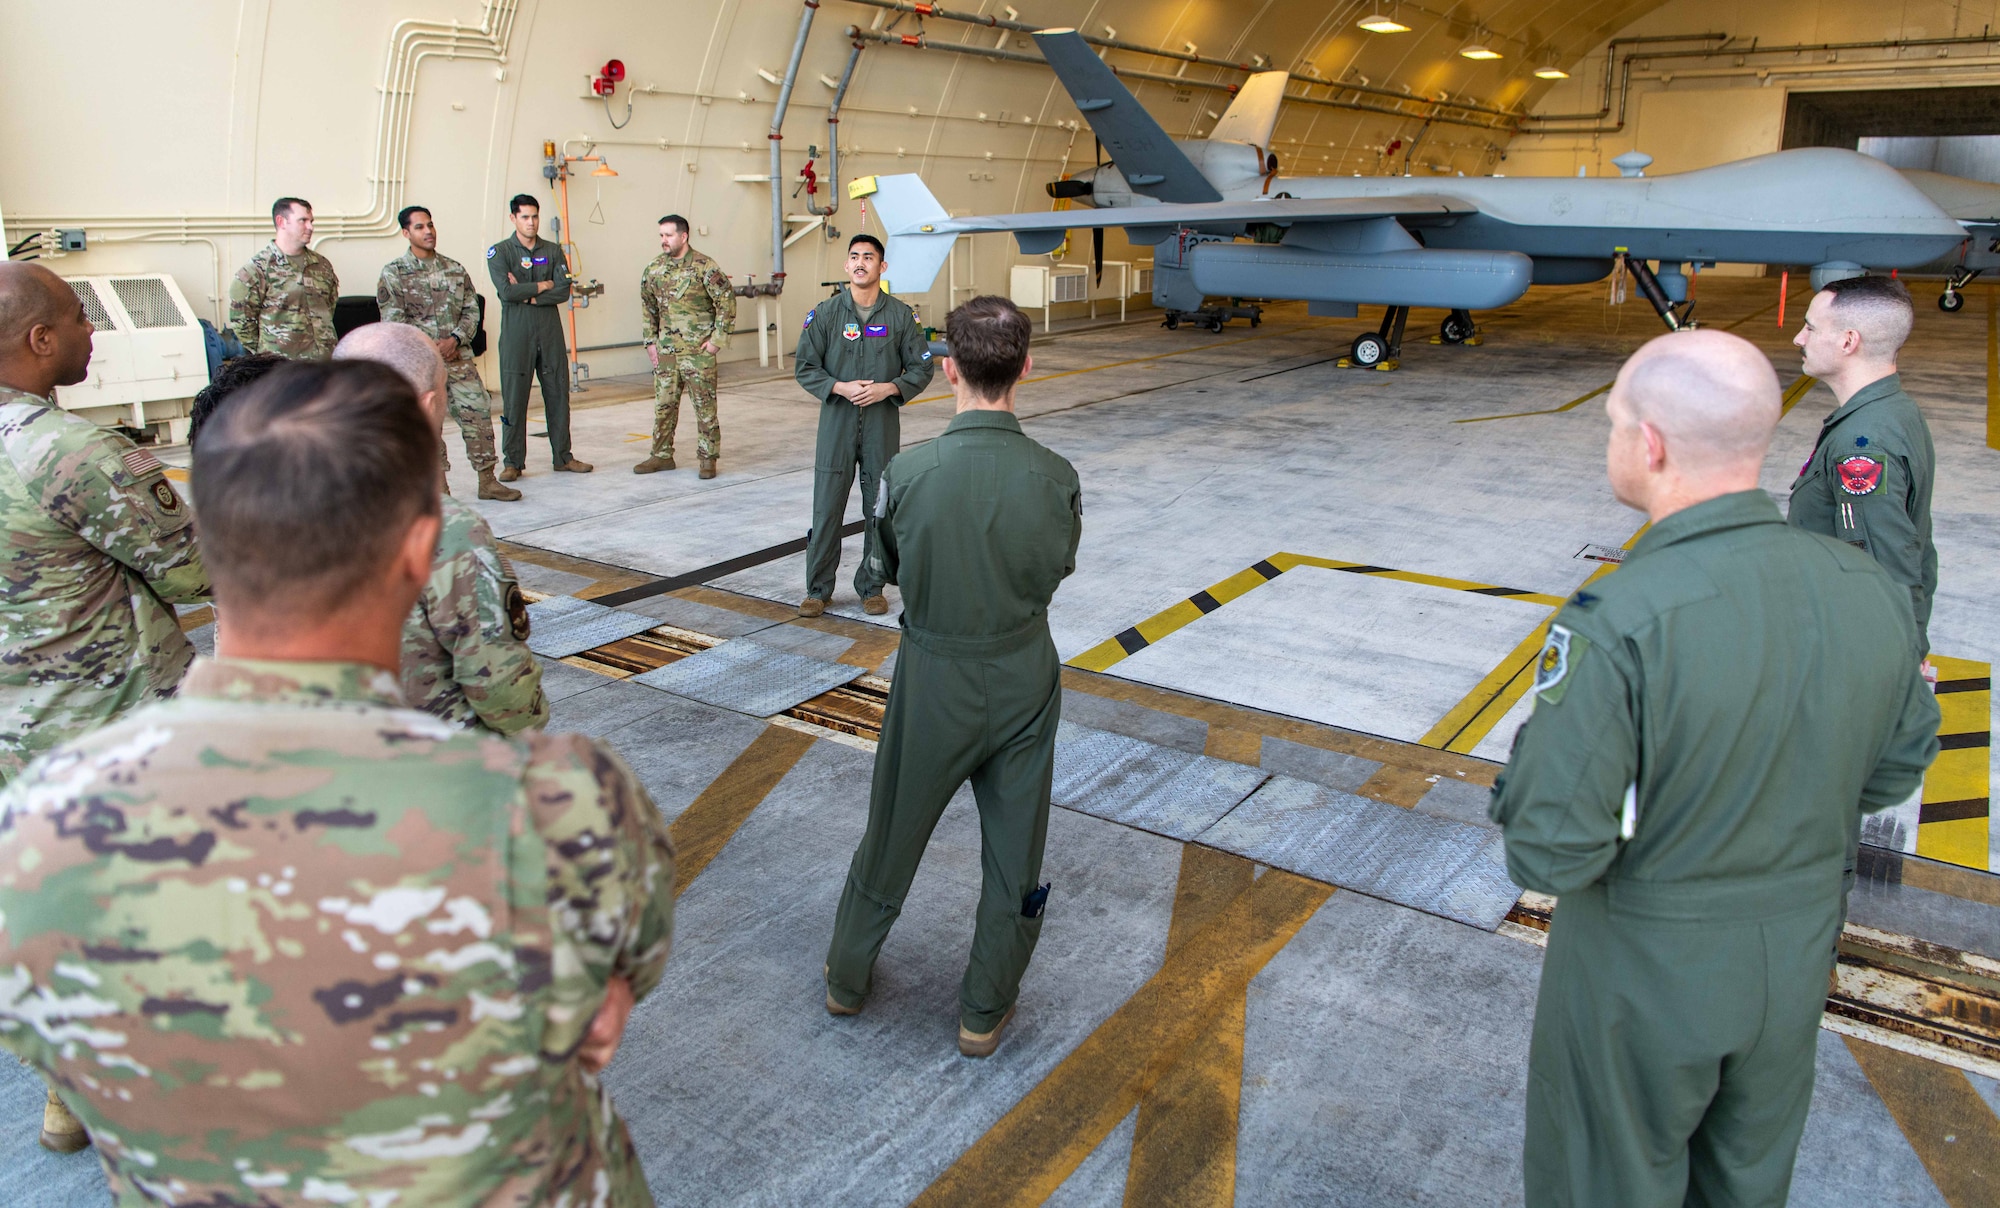 A group listens to a service member discuss the capabilities of the MQ9 behind him.